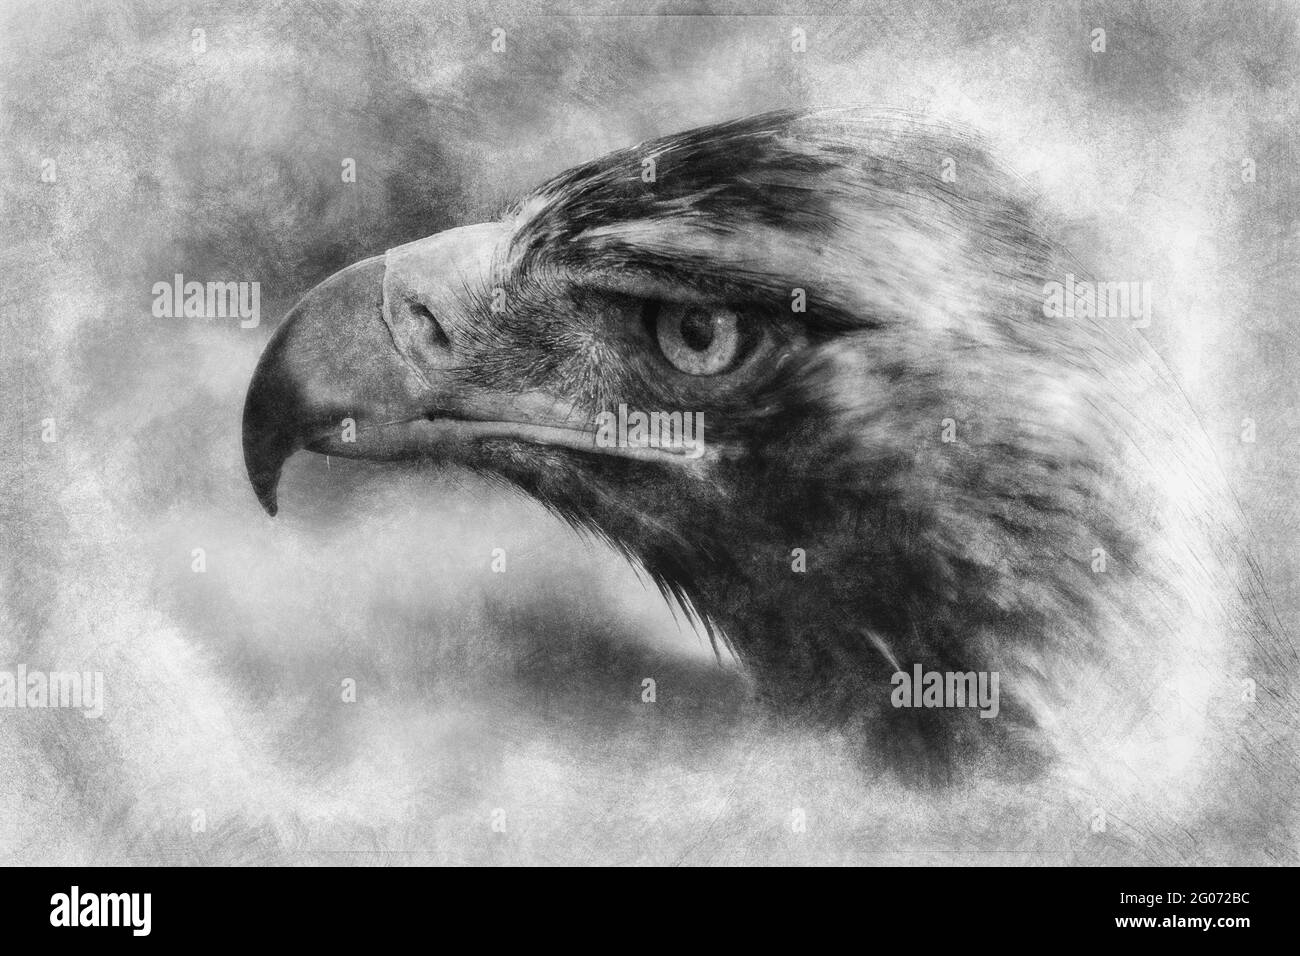 eagle brown plumage and pointed beak black and white drawing Stock Photo